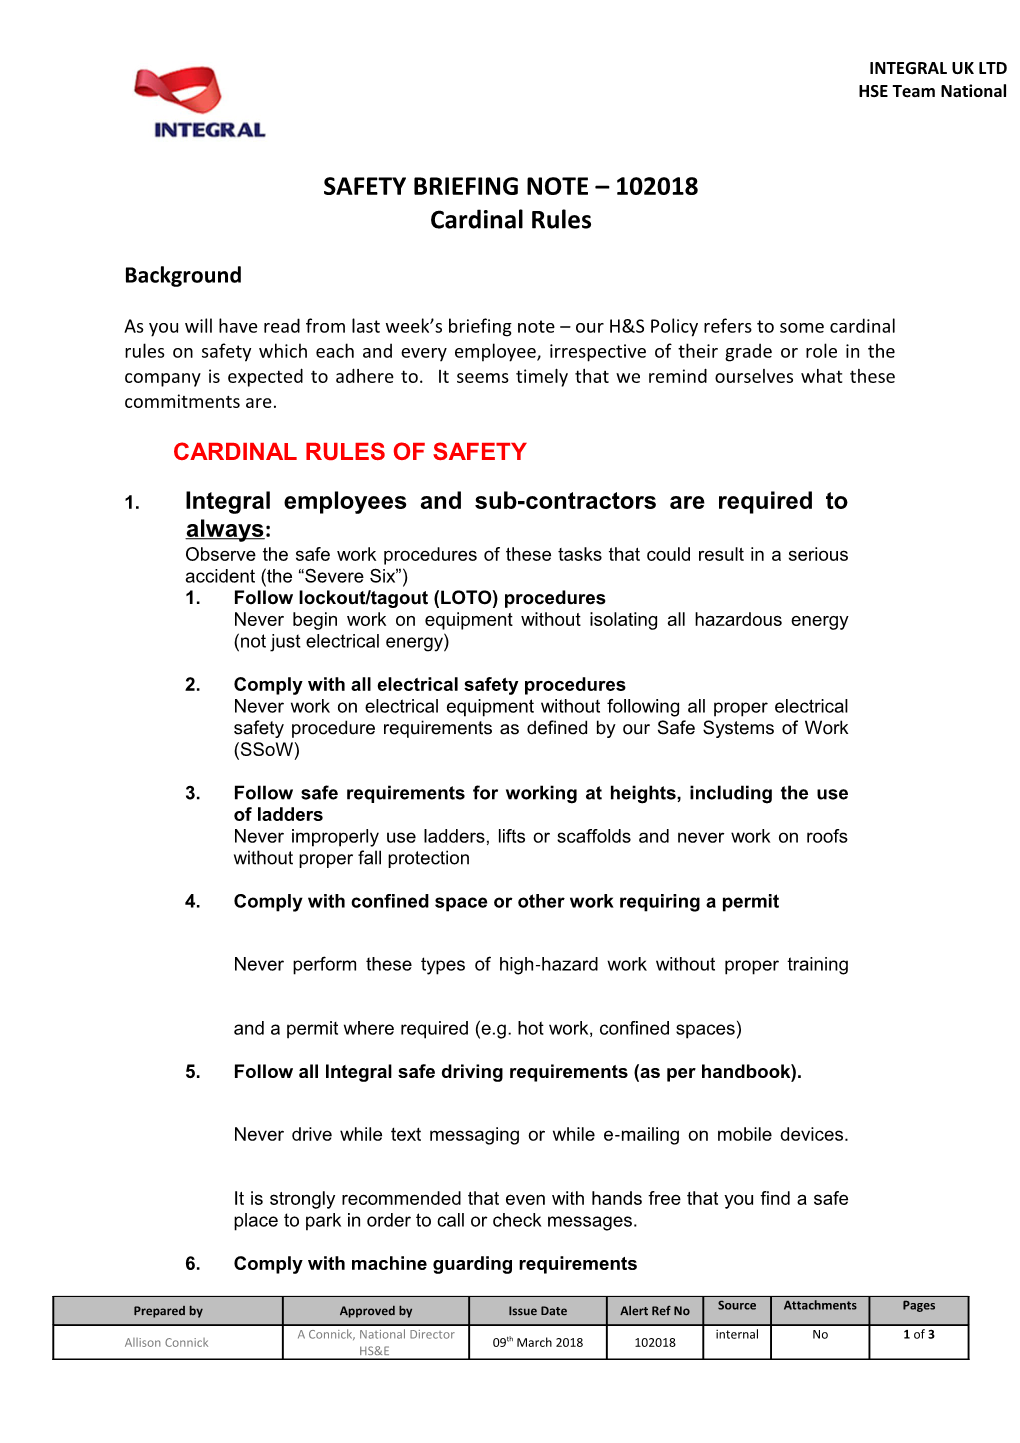 Safety Briefing Note 102018